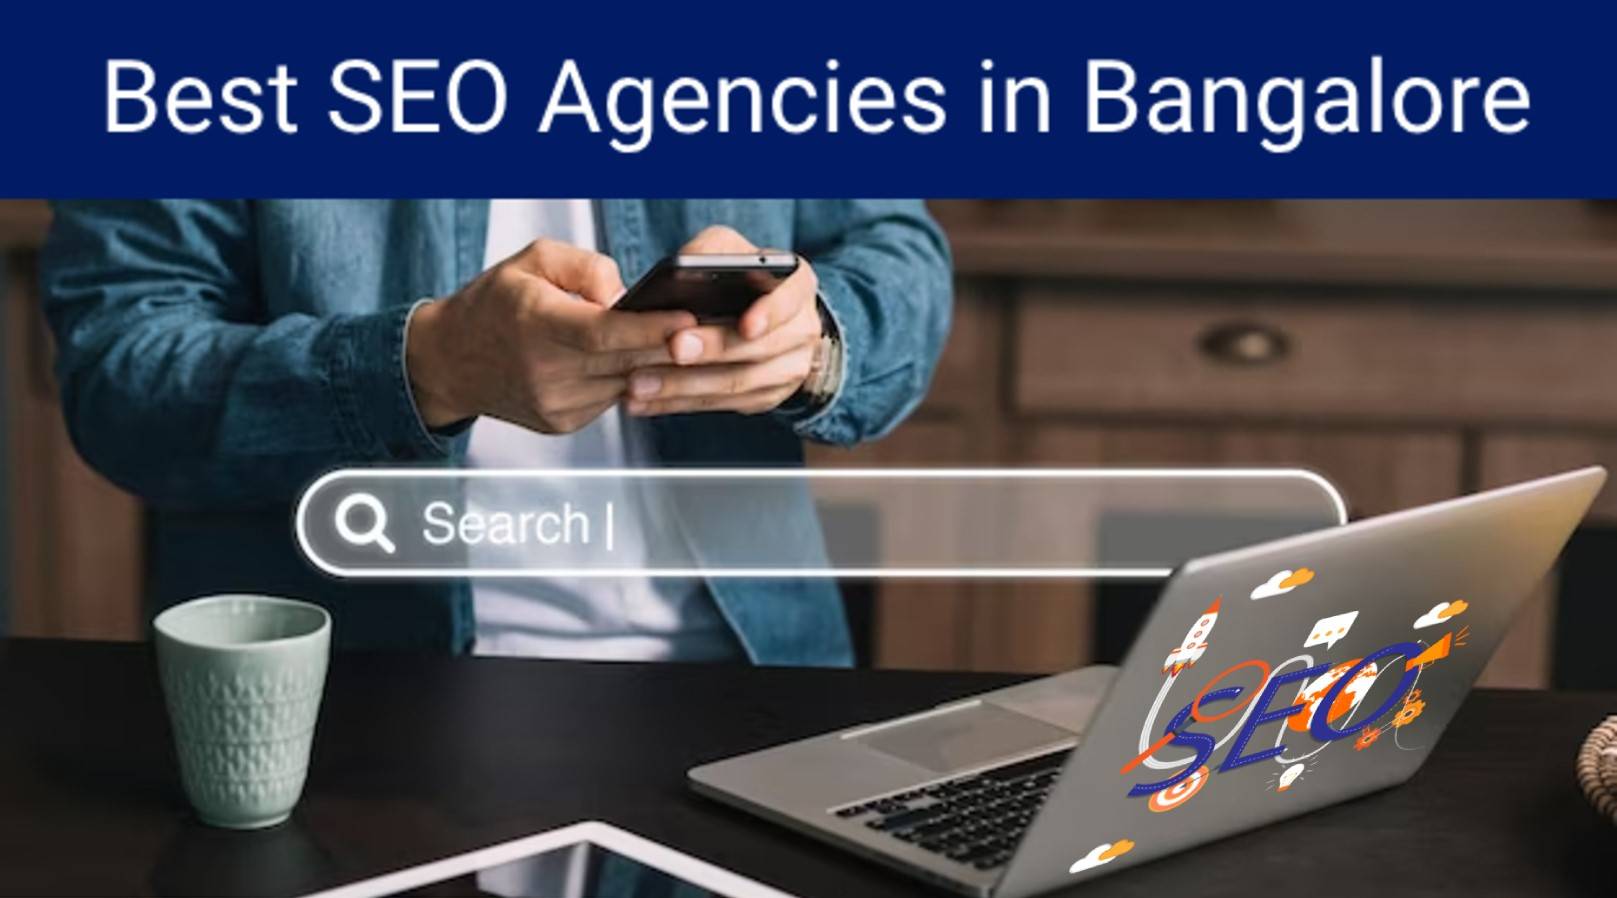 Conquering the Bangalore Market: Your Guide to SEO Experts and Agencies